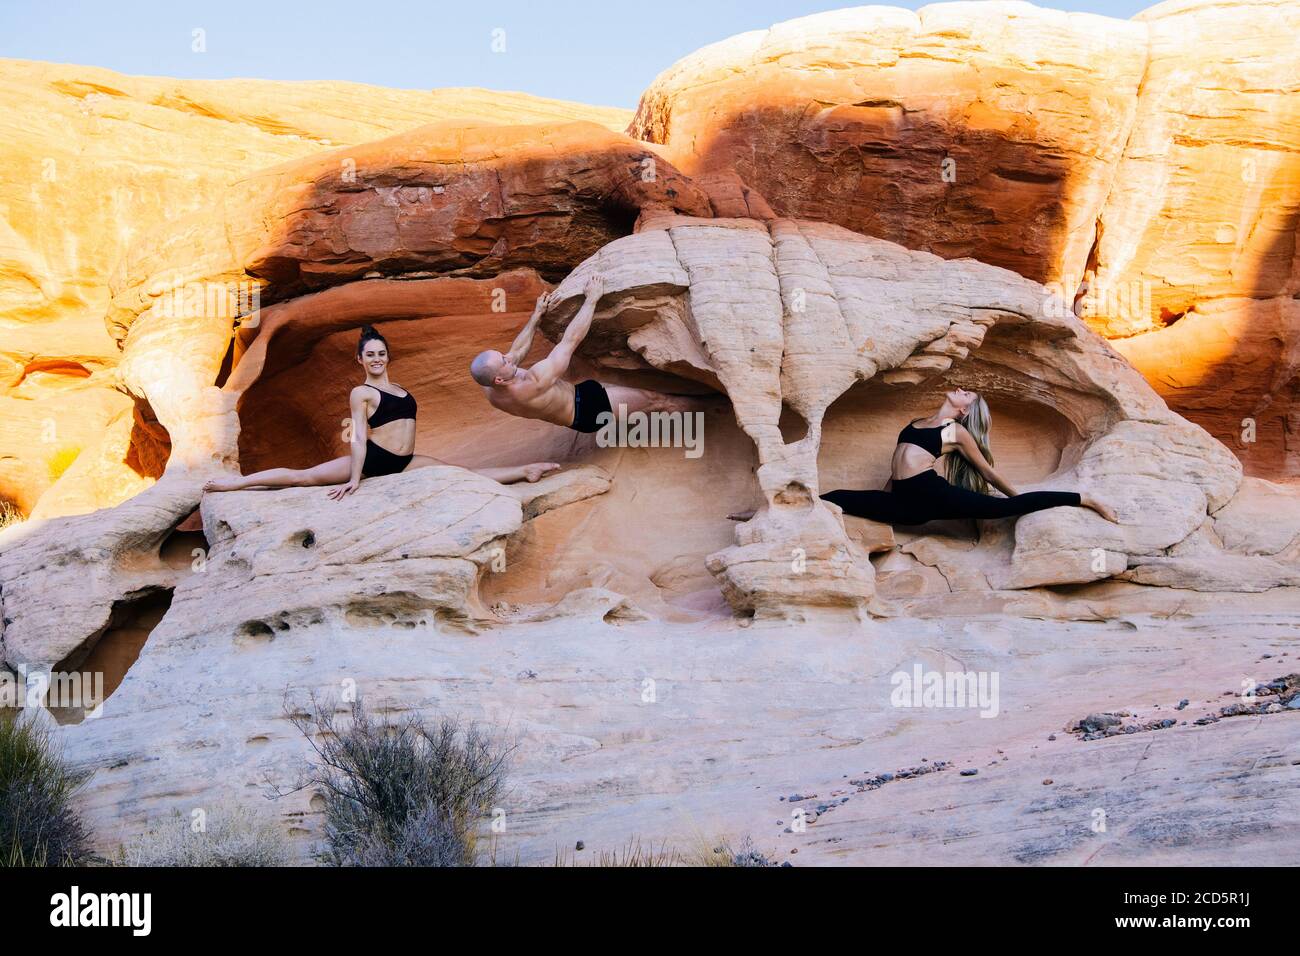 Group of three gymnasts in desert,  State Park, Overton, Nevada, USA Stock Photo